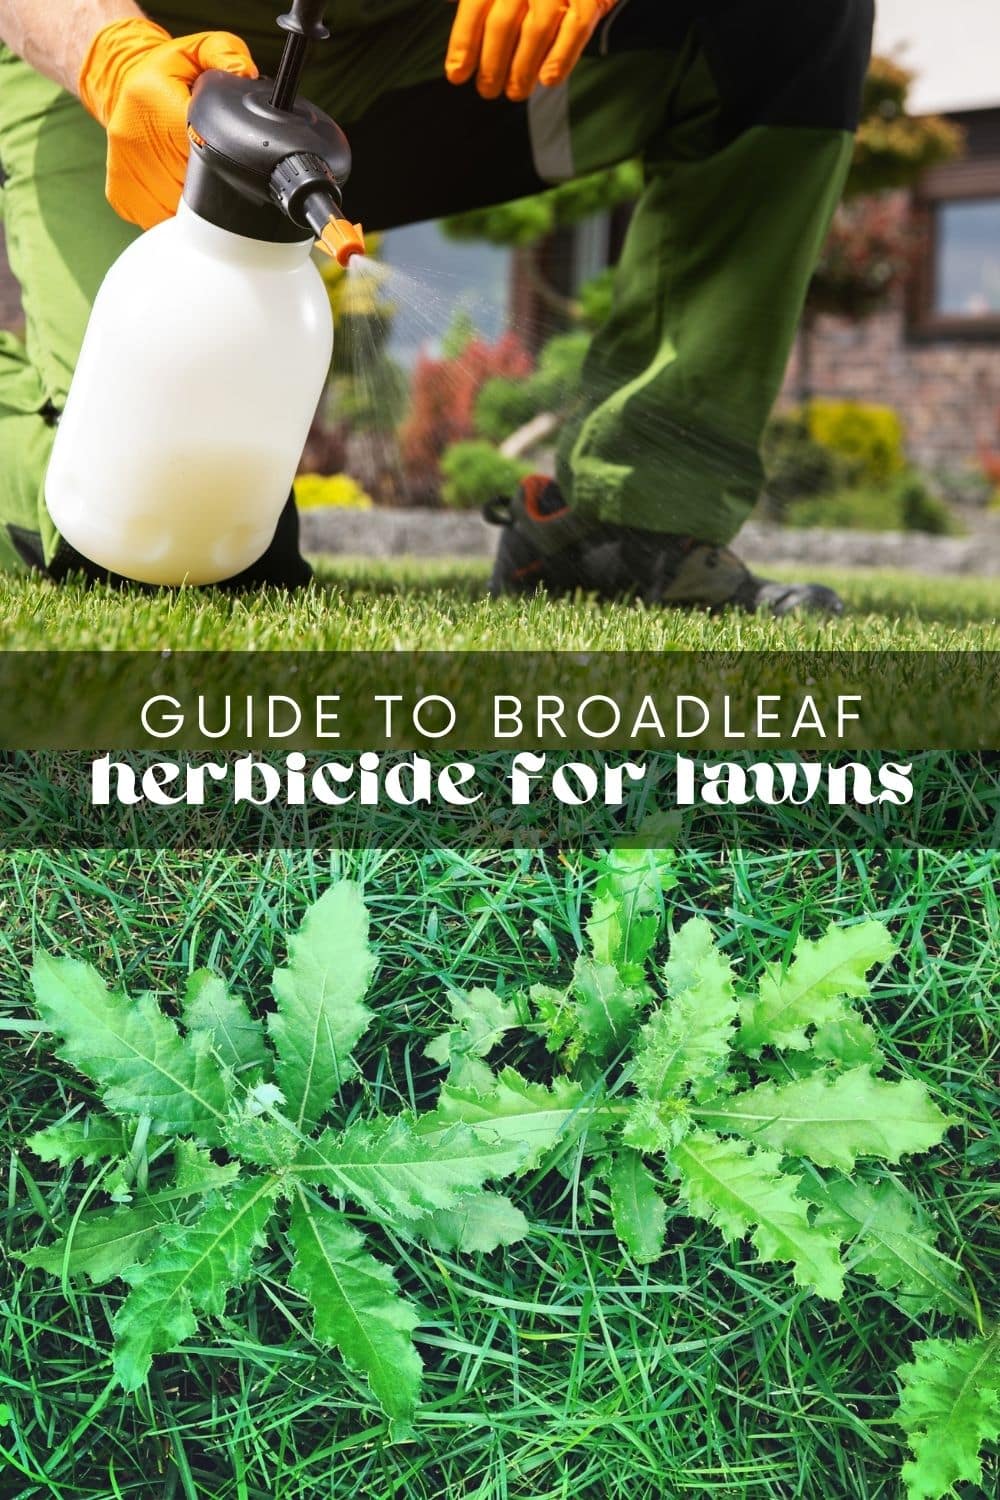 Weeds are a nuisance for anyone who takes pride in maintaining a lush, green lawn. They not only look unsightly but also compete with grass for valuable nutrients and water. If you're tired of constantly pulling out weeds by hand, then it's time to consider using some broadleaf herbicides.